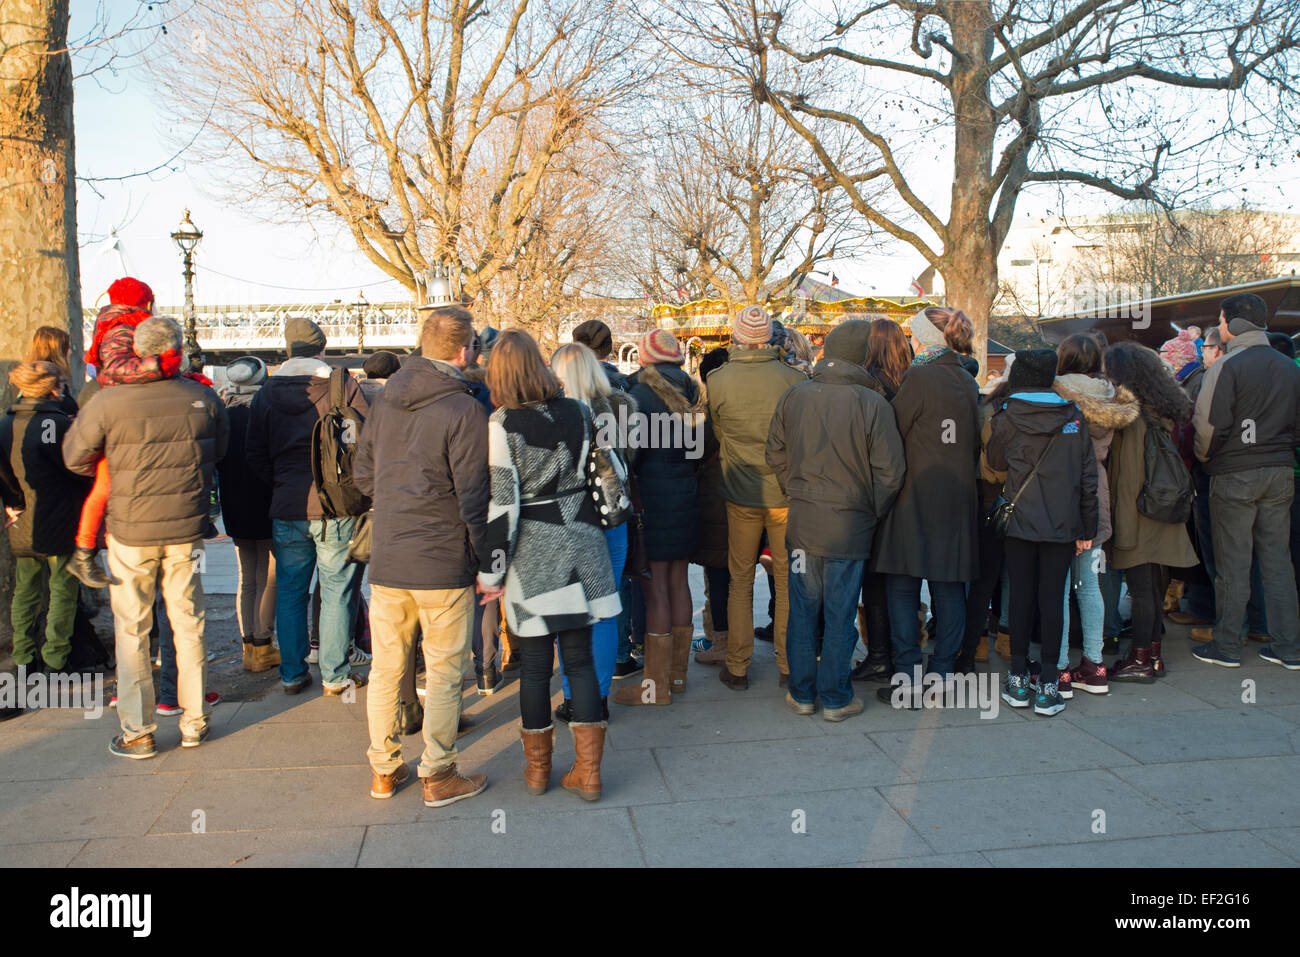 Rear view of People watching entertainers at the embankment London UK Stock Photo